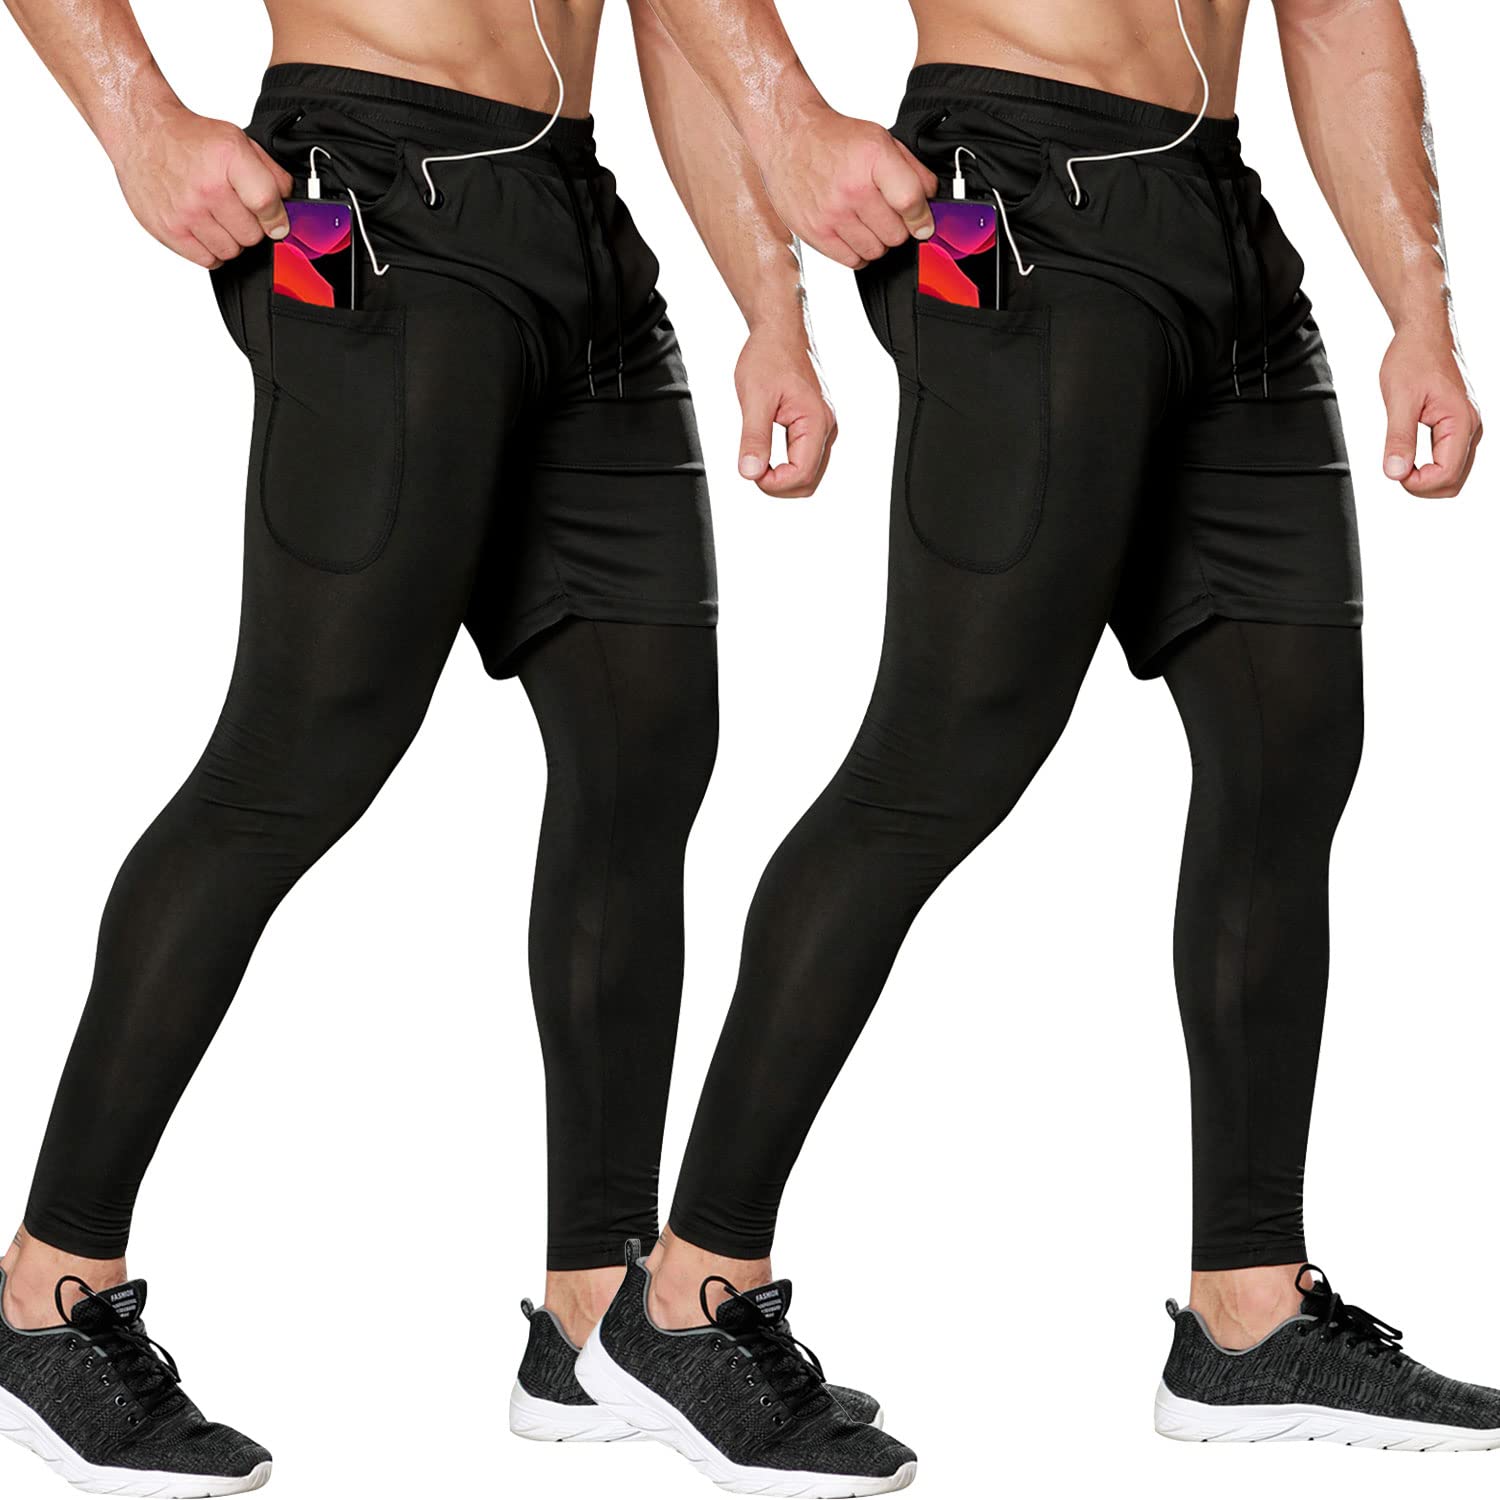 Mens Workout Shorts With Pocket Running Tights Gym Leggings Tights